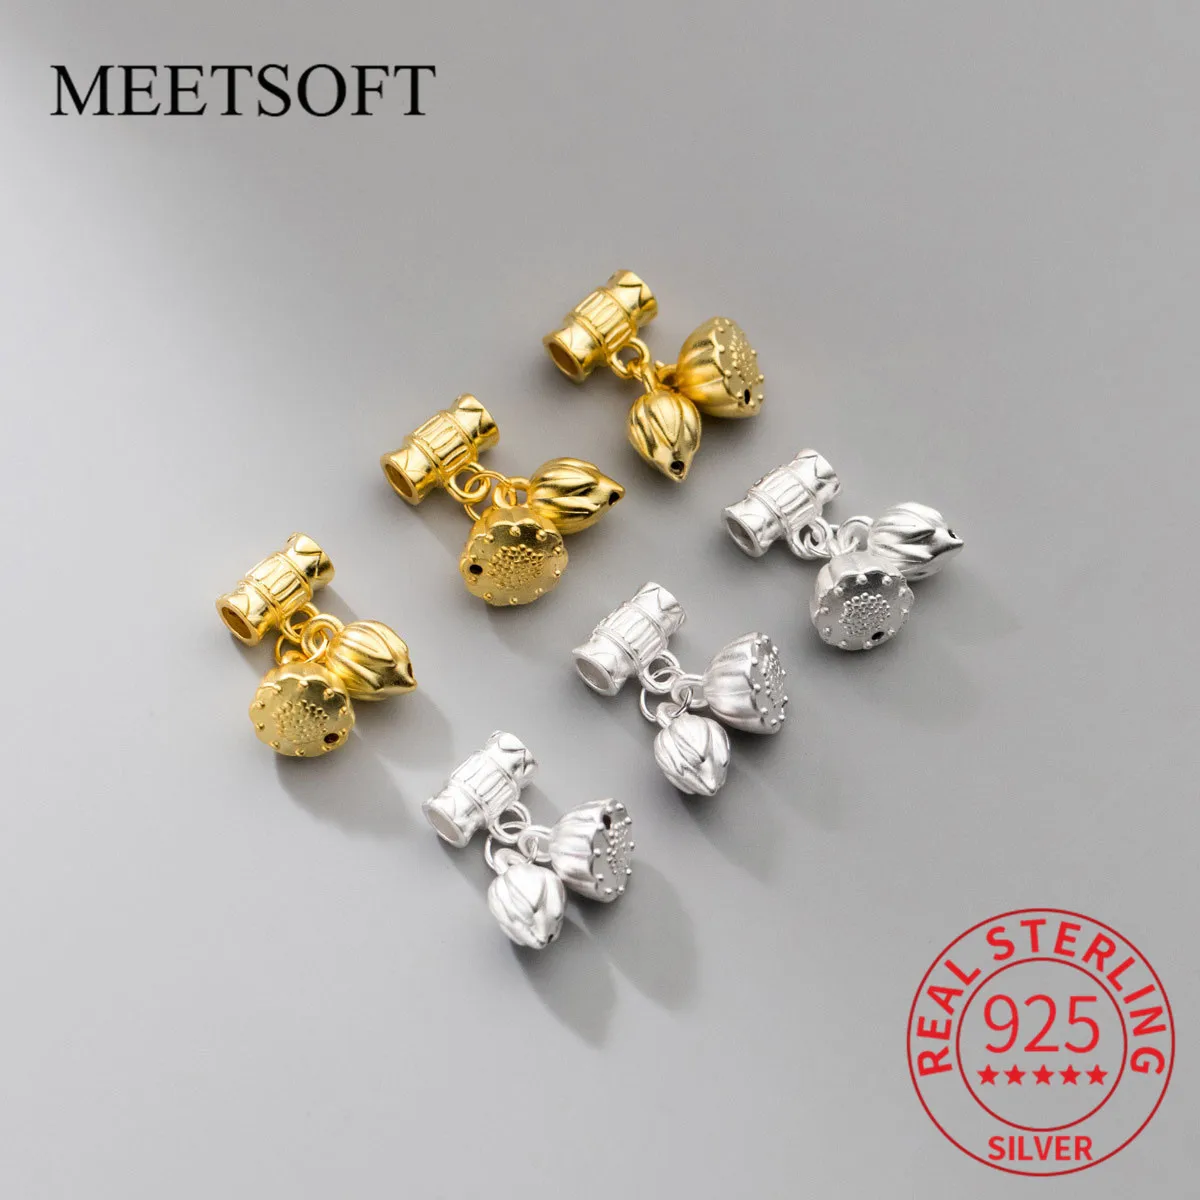 

MEETSOFT S925 Sterling Silver Twin Lotus Bud Pendant Charms Of DIY Handmade Braided Bracelet Necklace Accessory Gift Wholesale